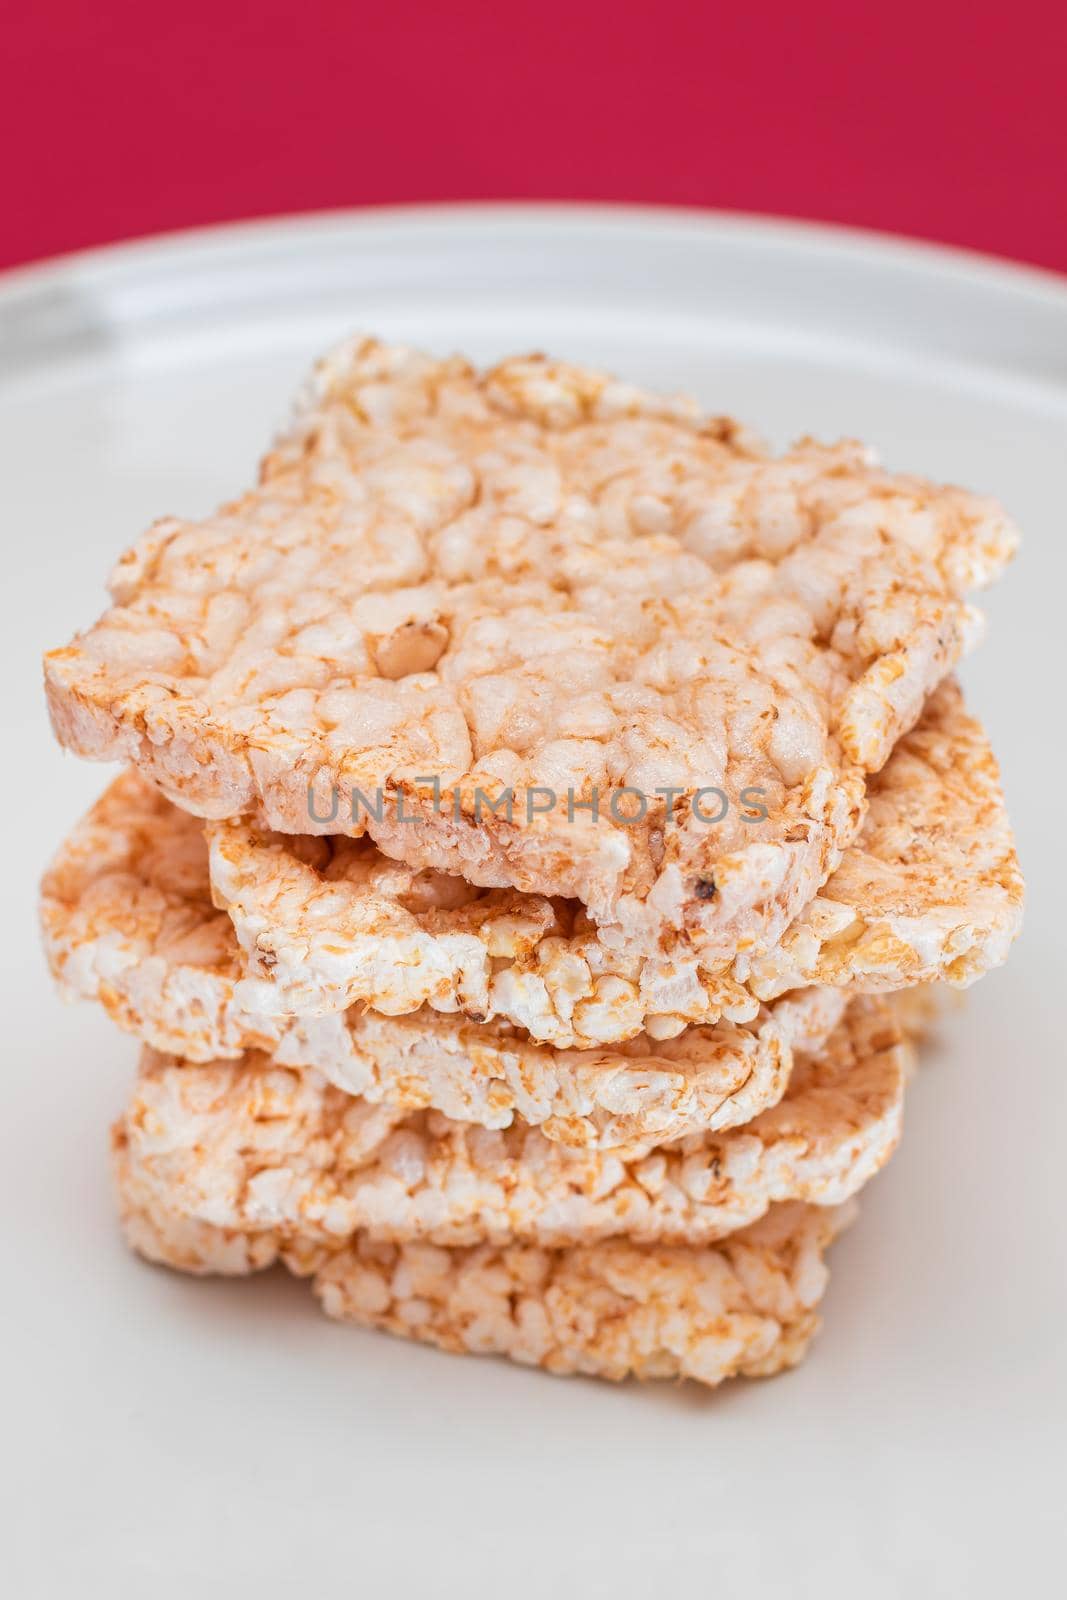 A Stack of Square Rice Cakes on White Plate. Dietary Crispbread